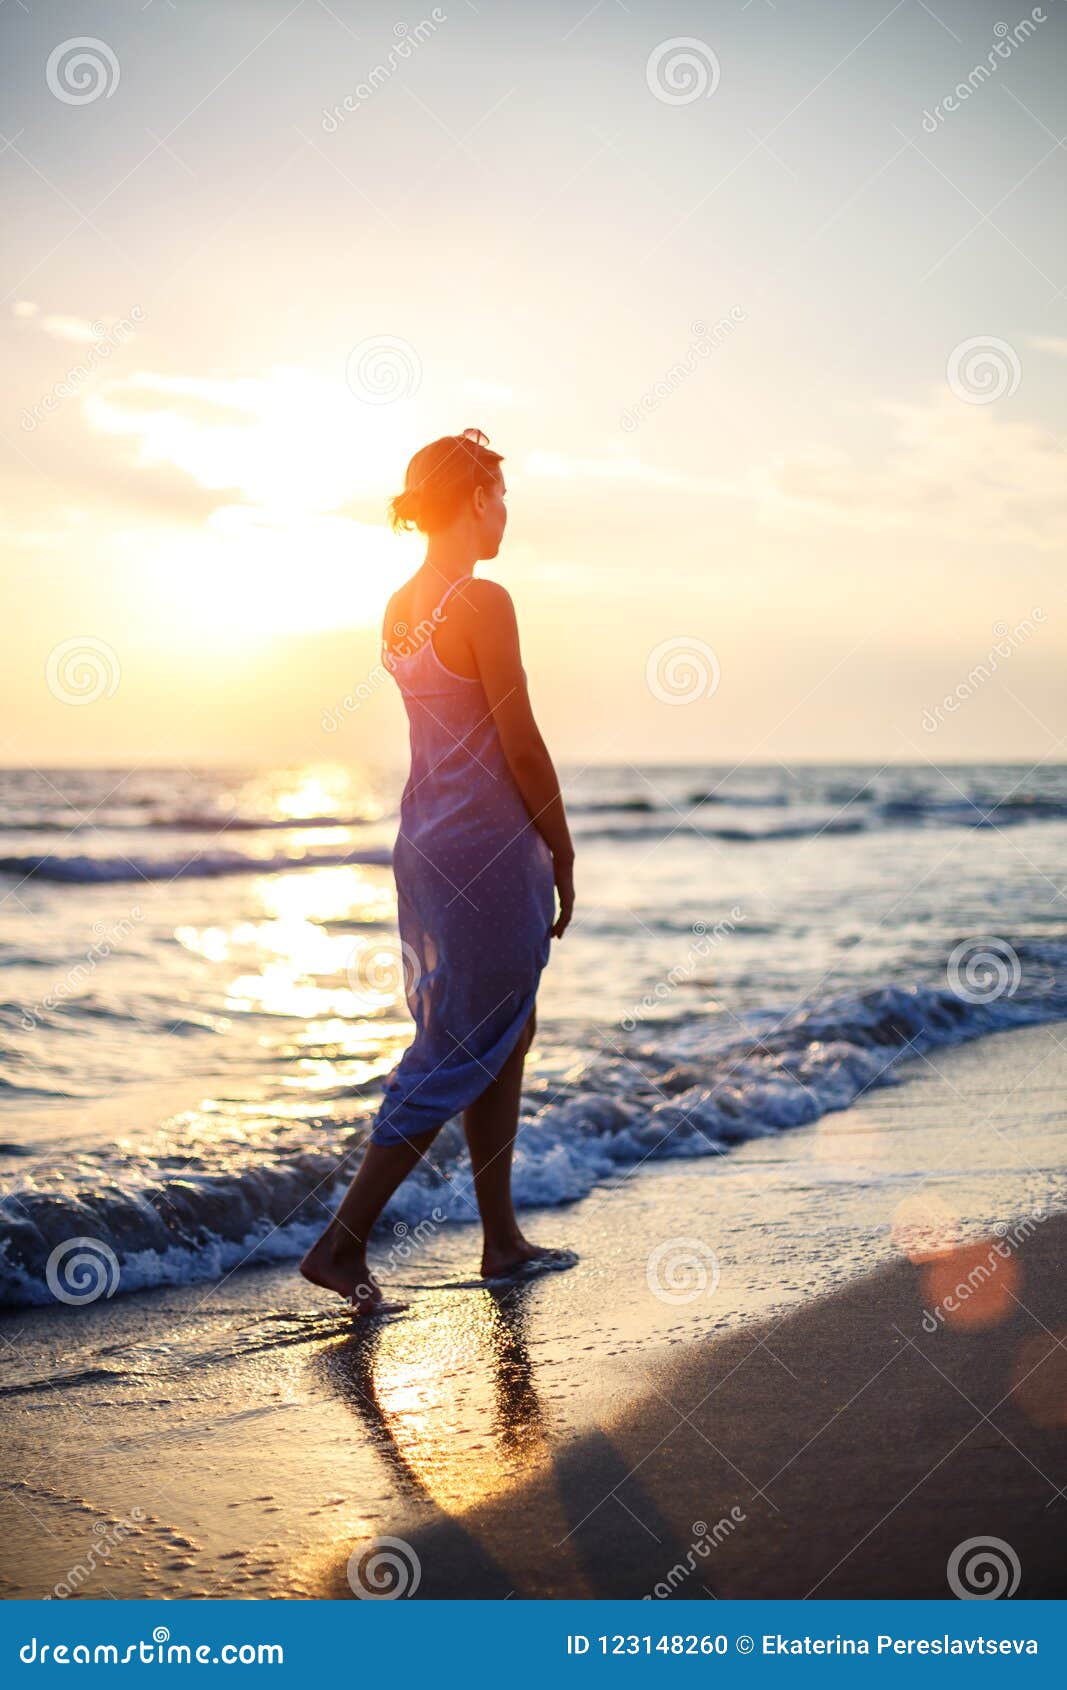 Woman Walking on the Beach in the Surf at Sunset Stock Photo - Image of ...